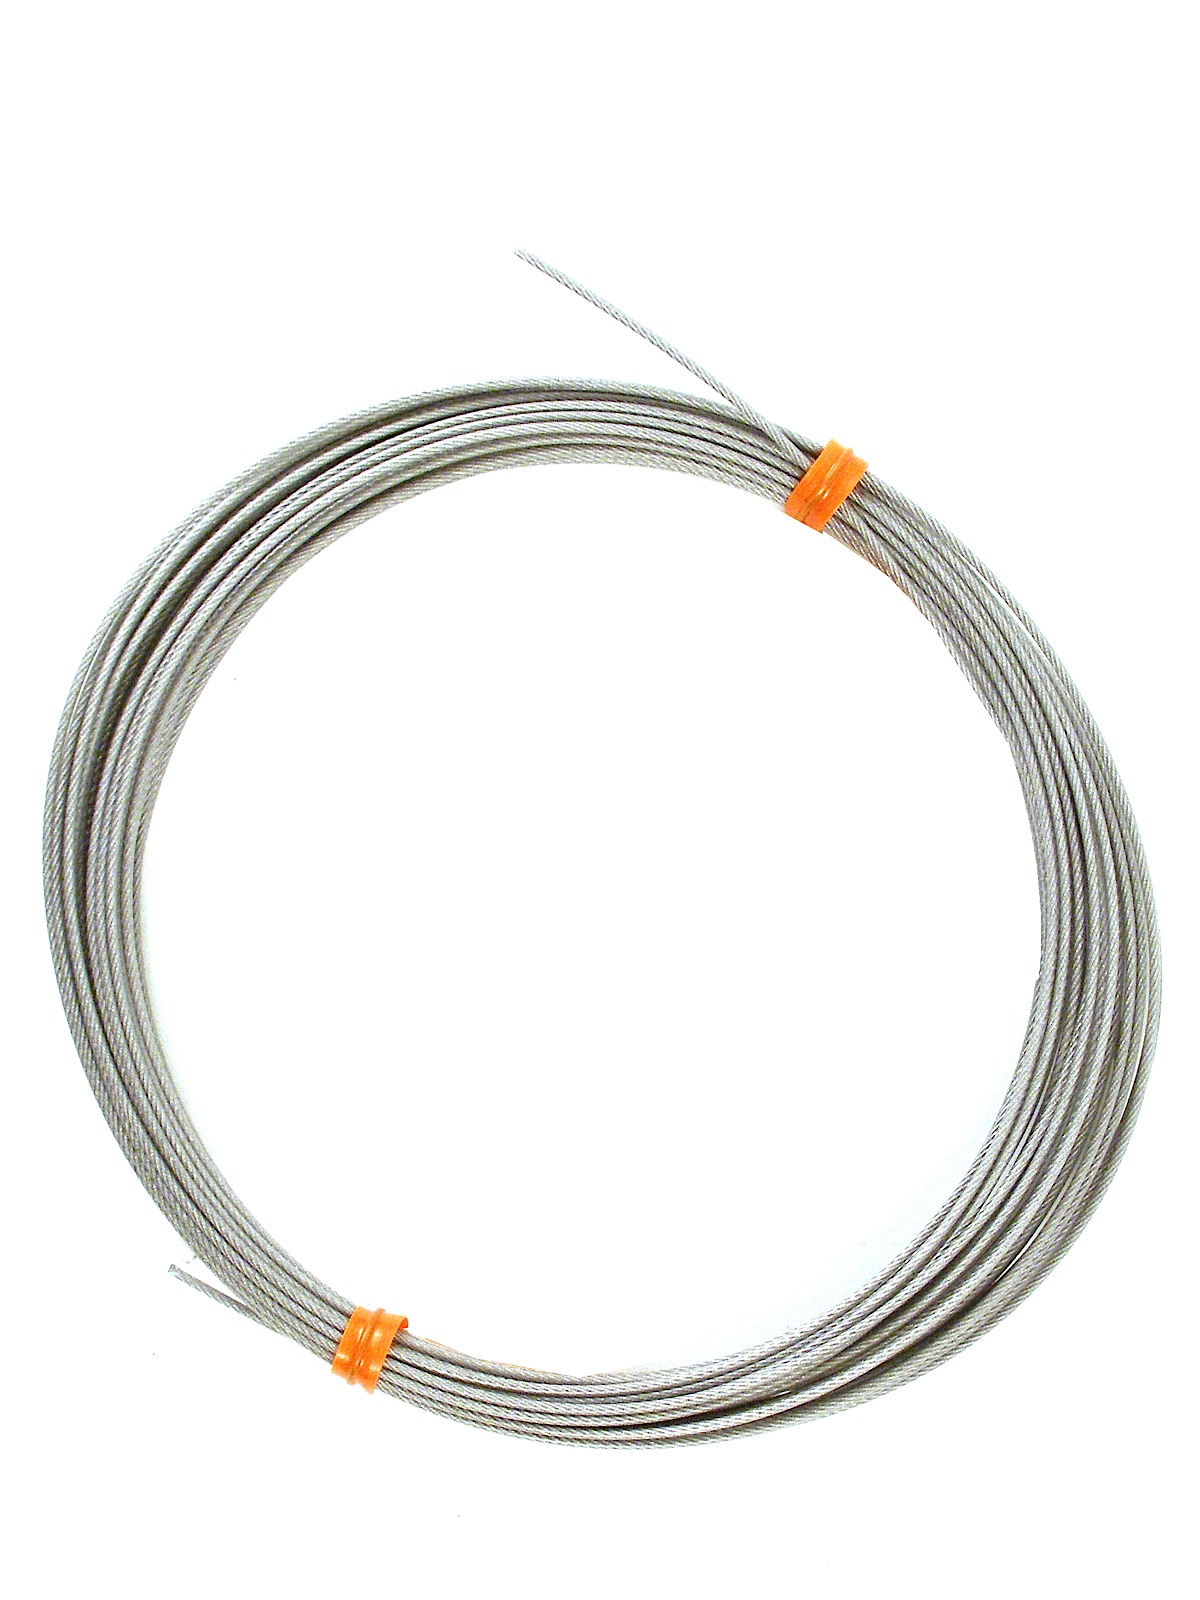 Replacement Cable For Straightedges For 72 In. - 96 In.